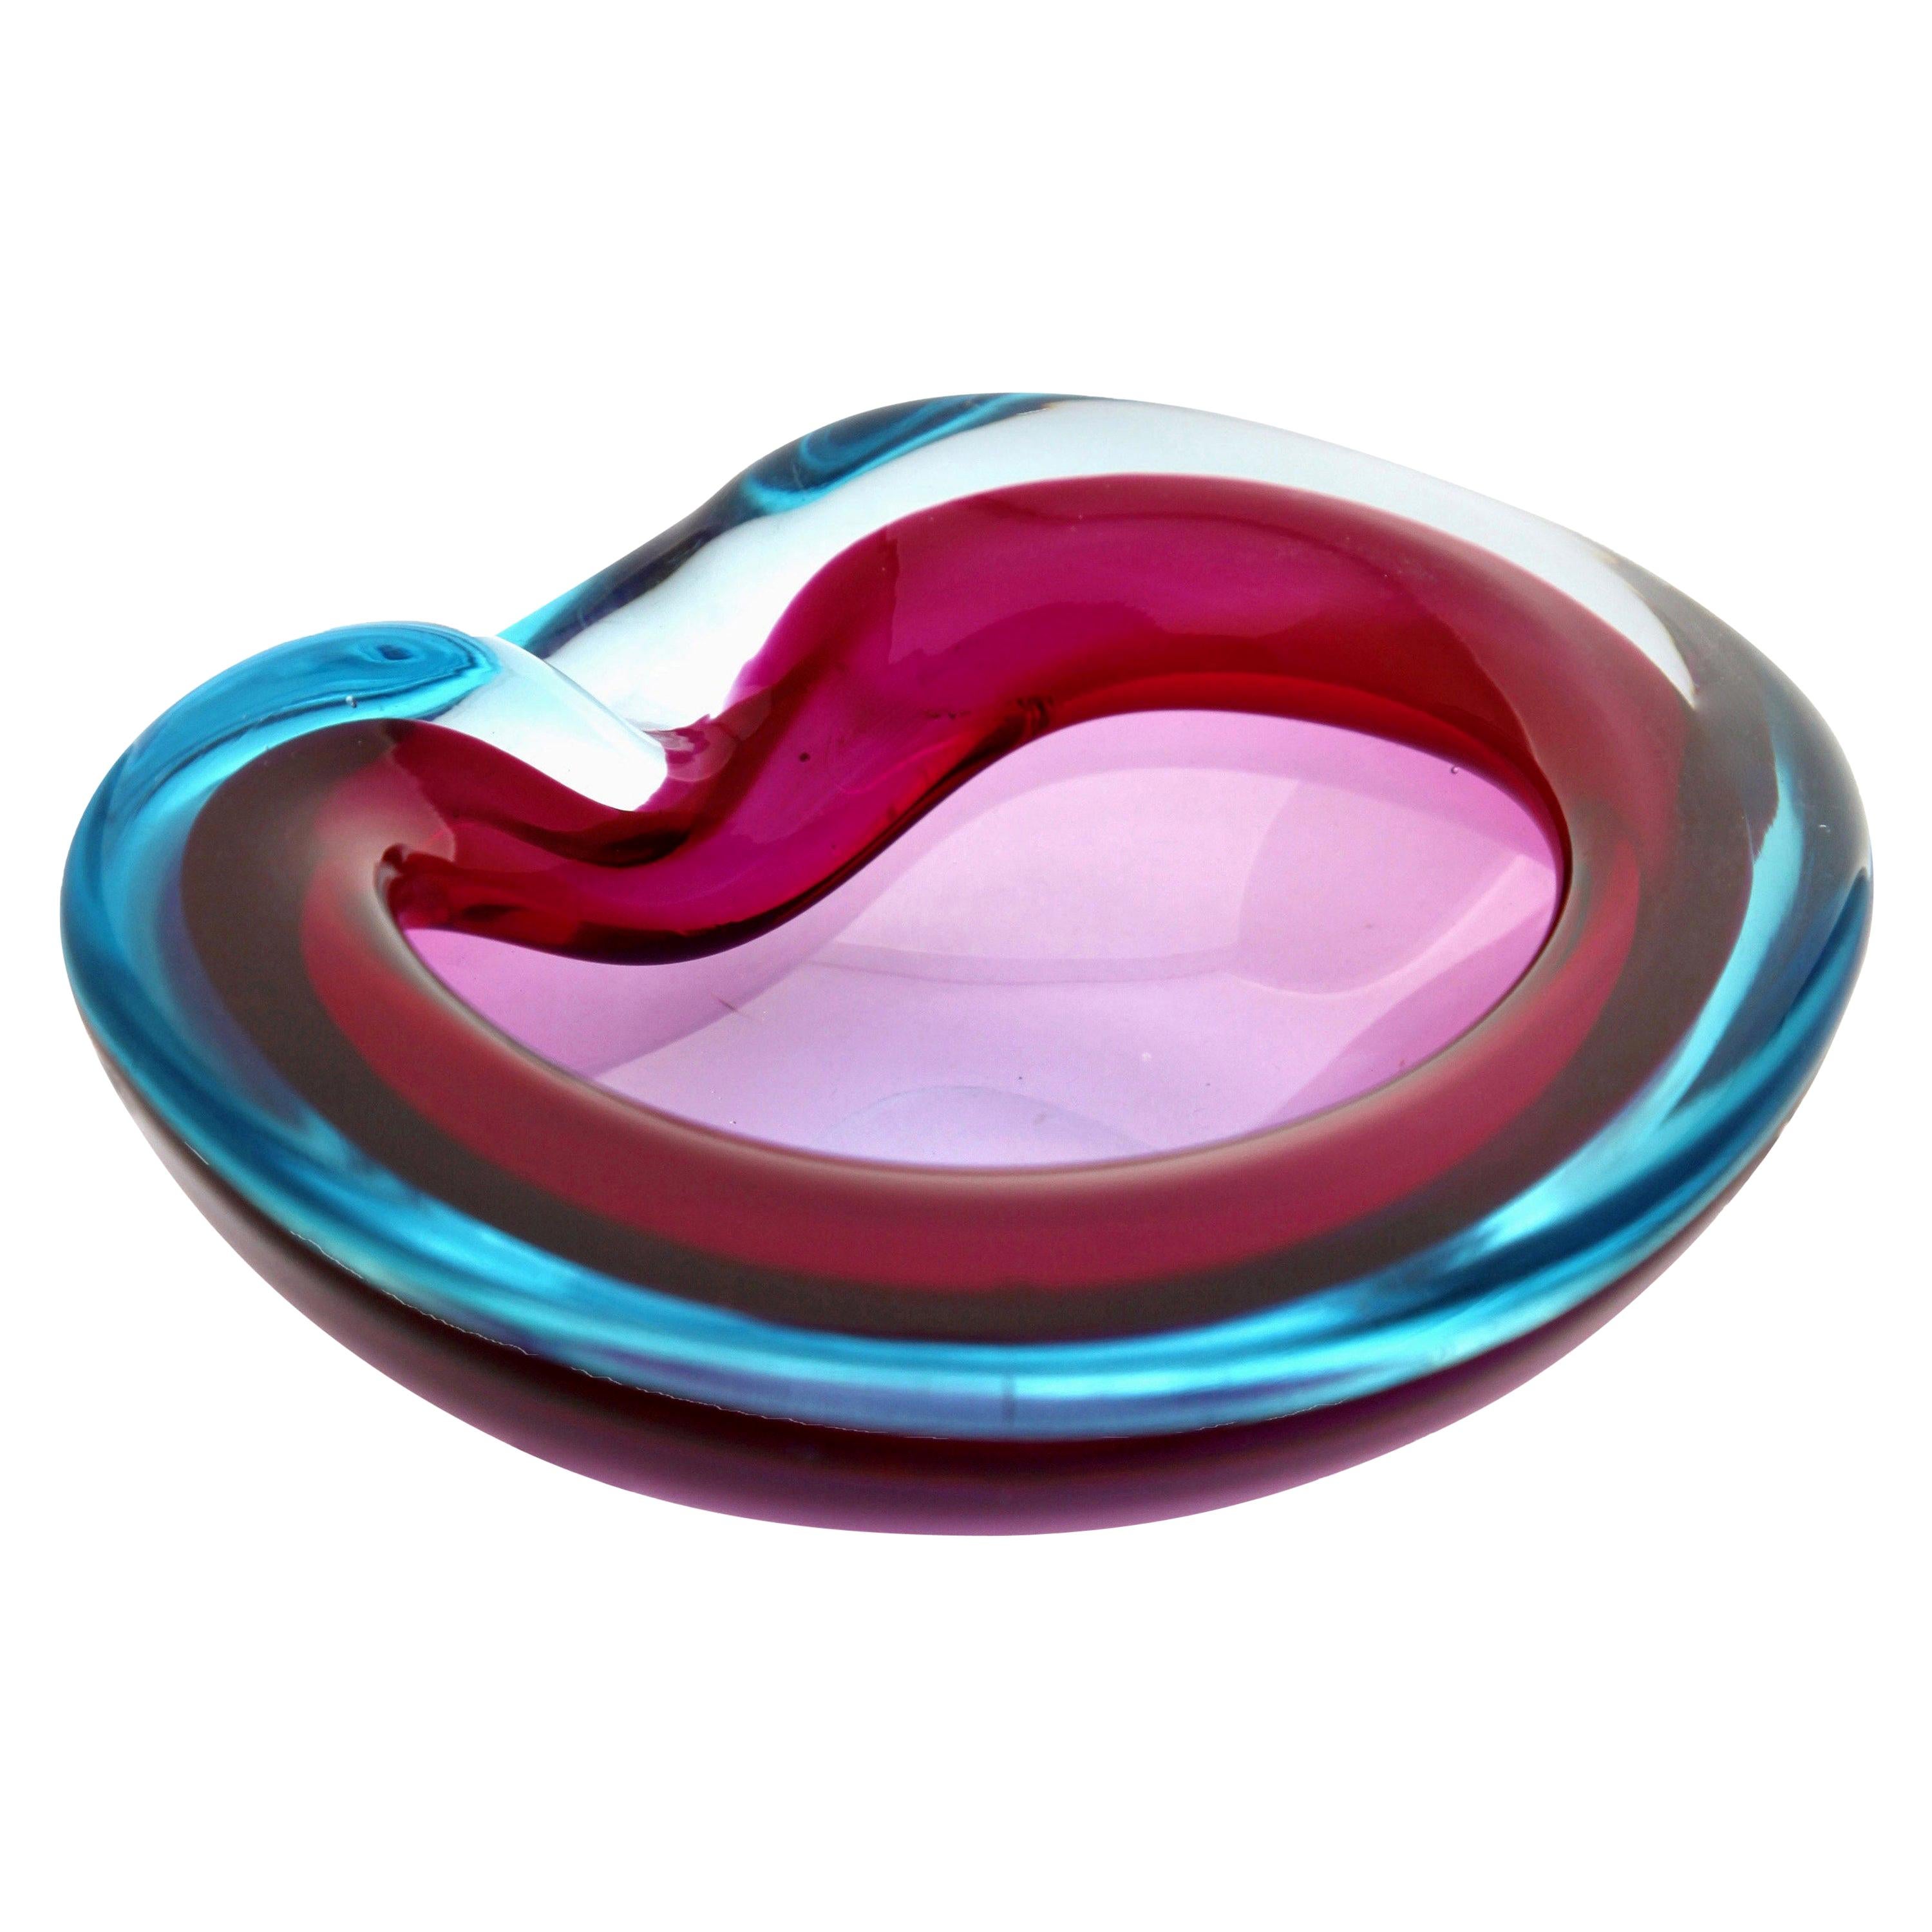 Murano Glass Bowl with Four Lobes, Attributed to Flavio Poli for Seguso